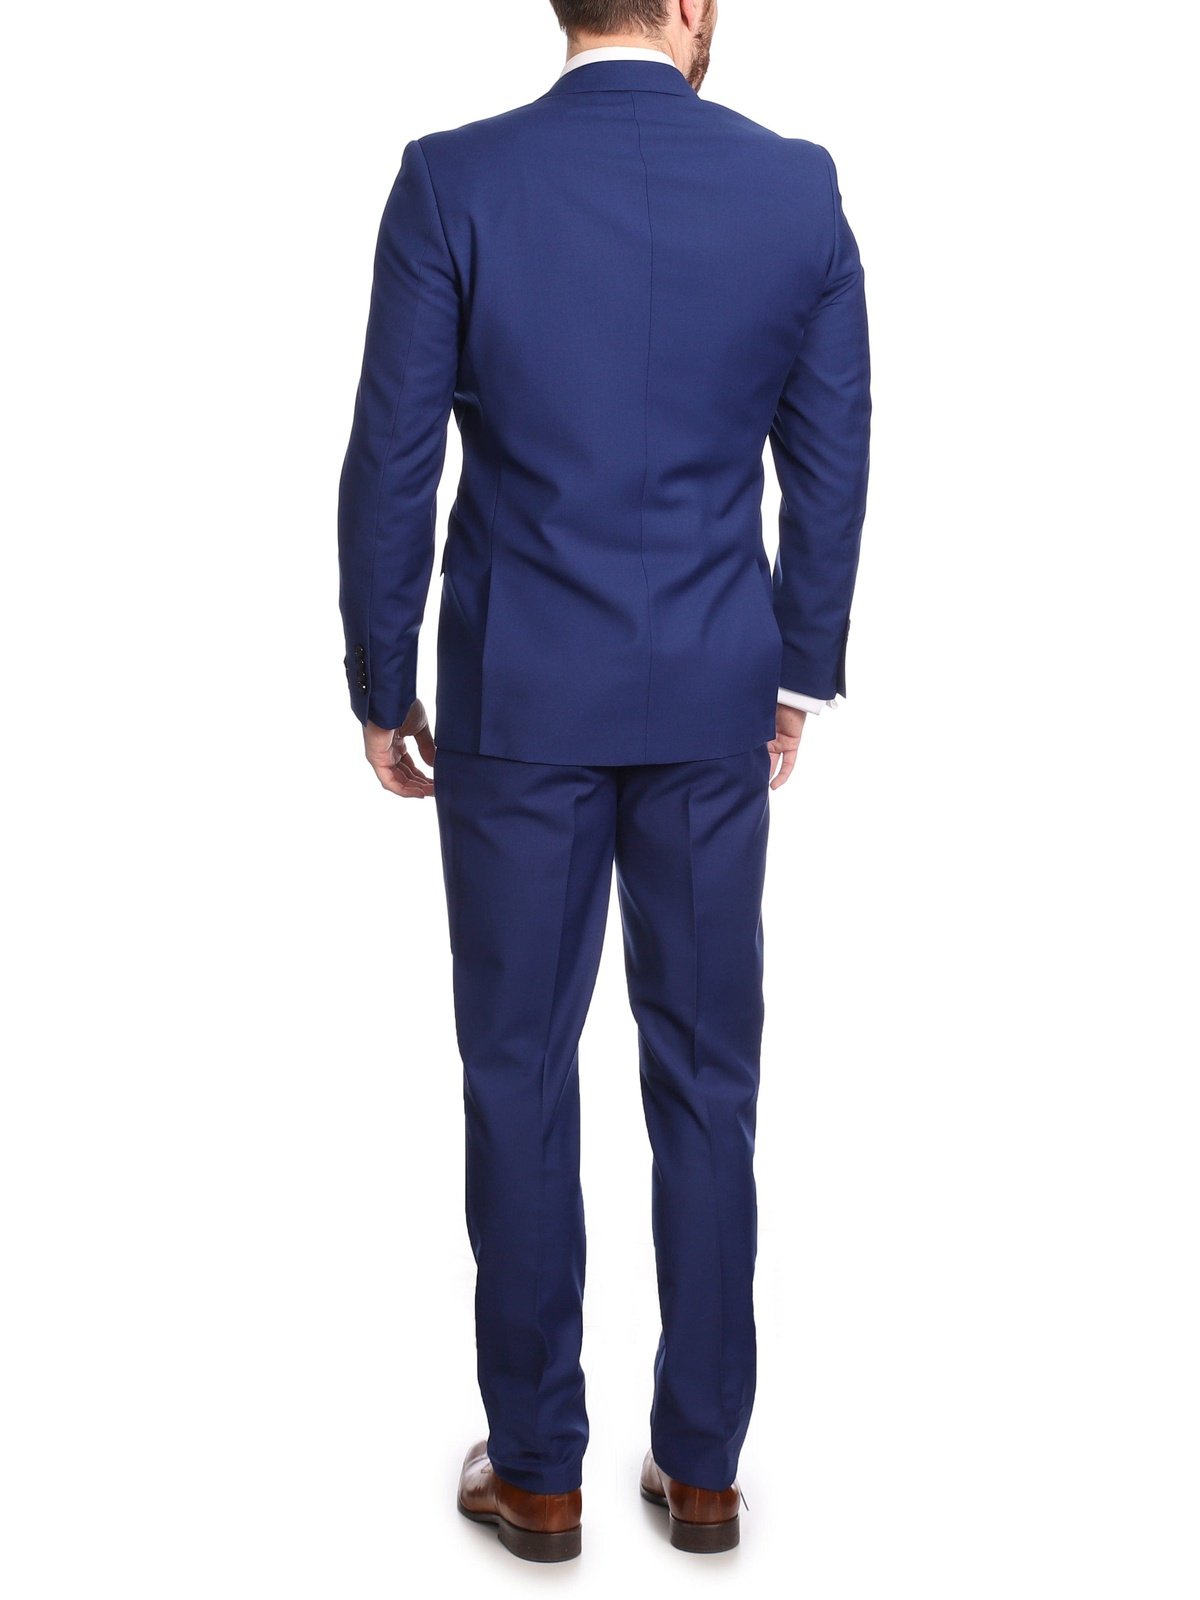 Label M Mens Classic Fit Two Button 100% Wool Wrinkle Resistant Suit - Royal Blue